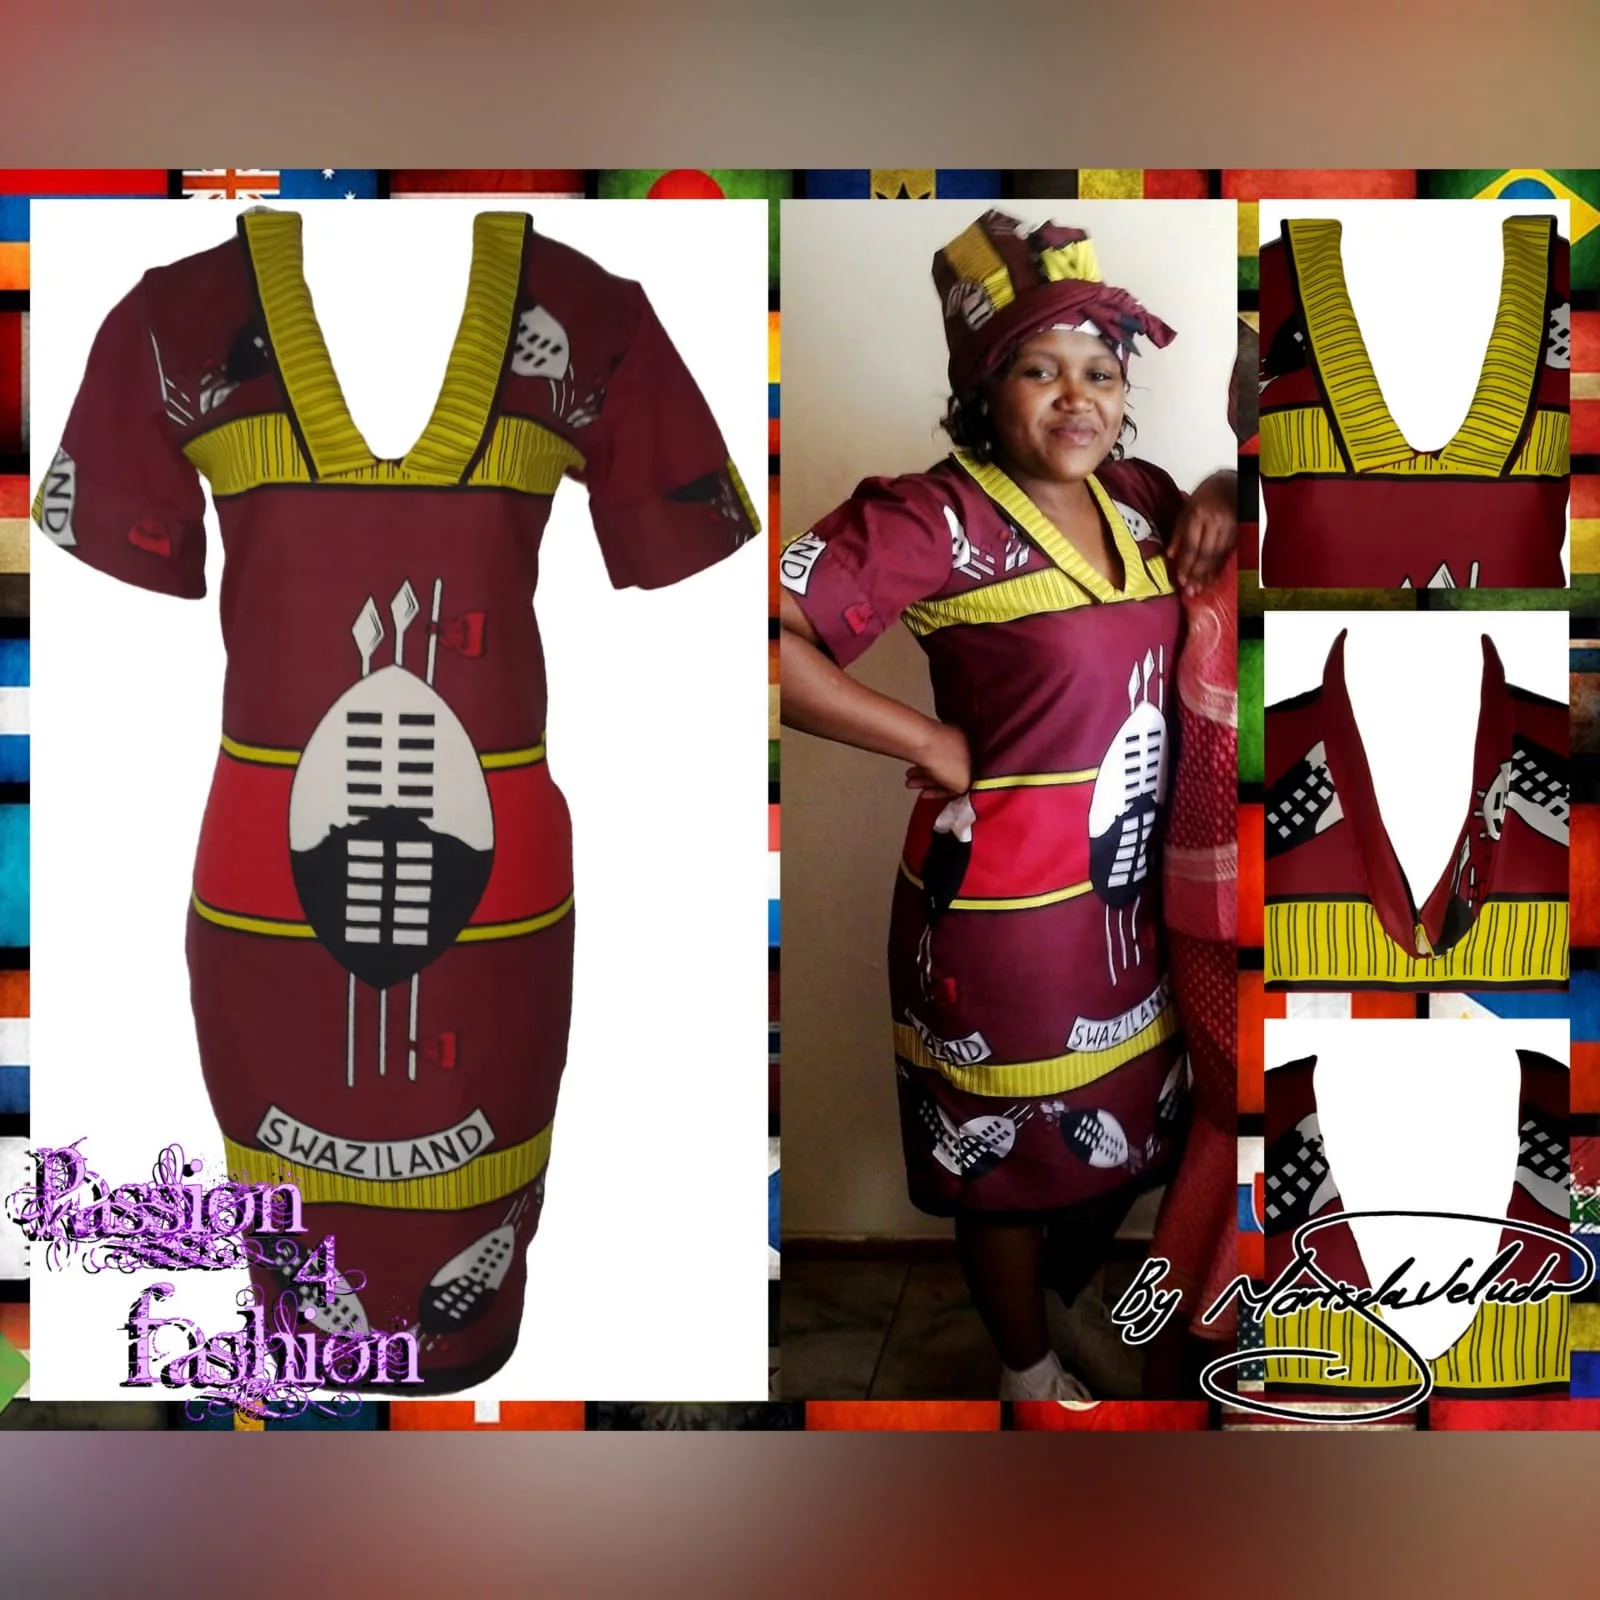 Traditional swati dress with matching swati doek 6 traditional swati dress with a v neckline, finished with a collar design that can be worn in 3 different ways. With a matching swati doek.